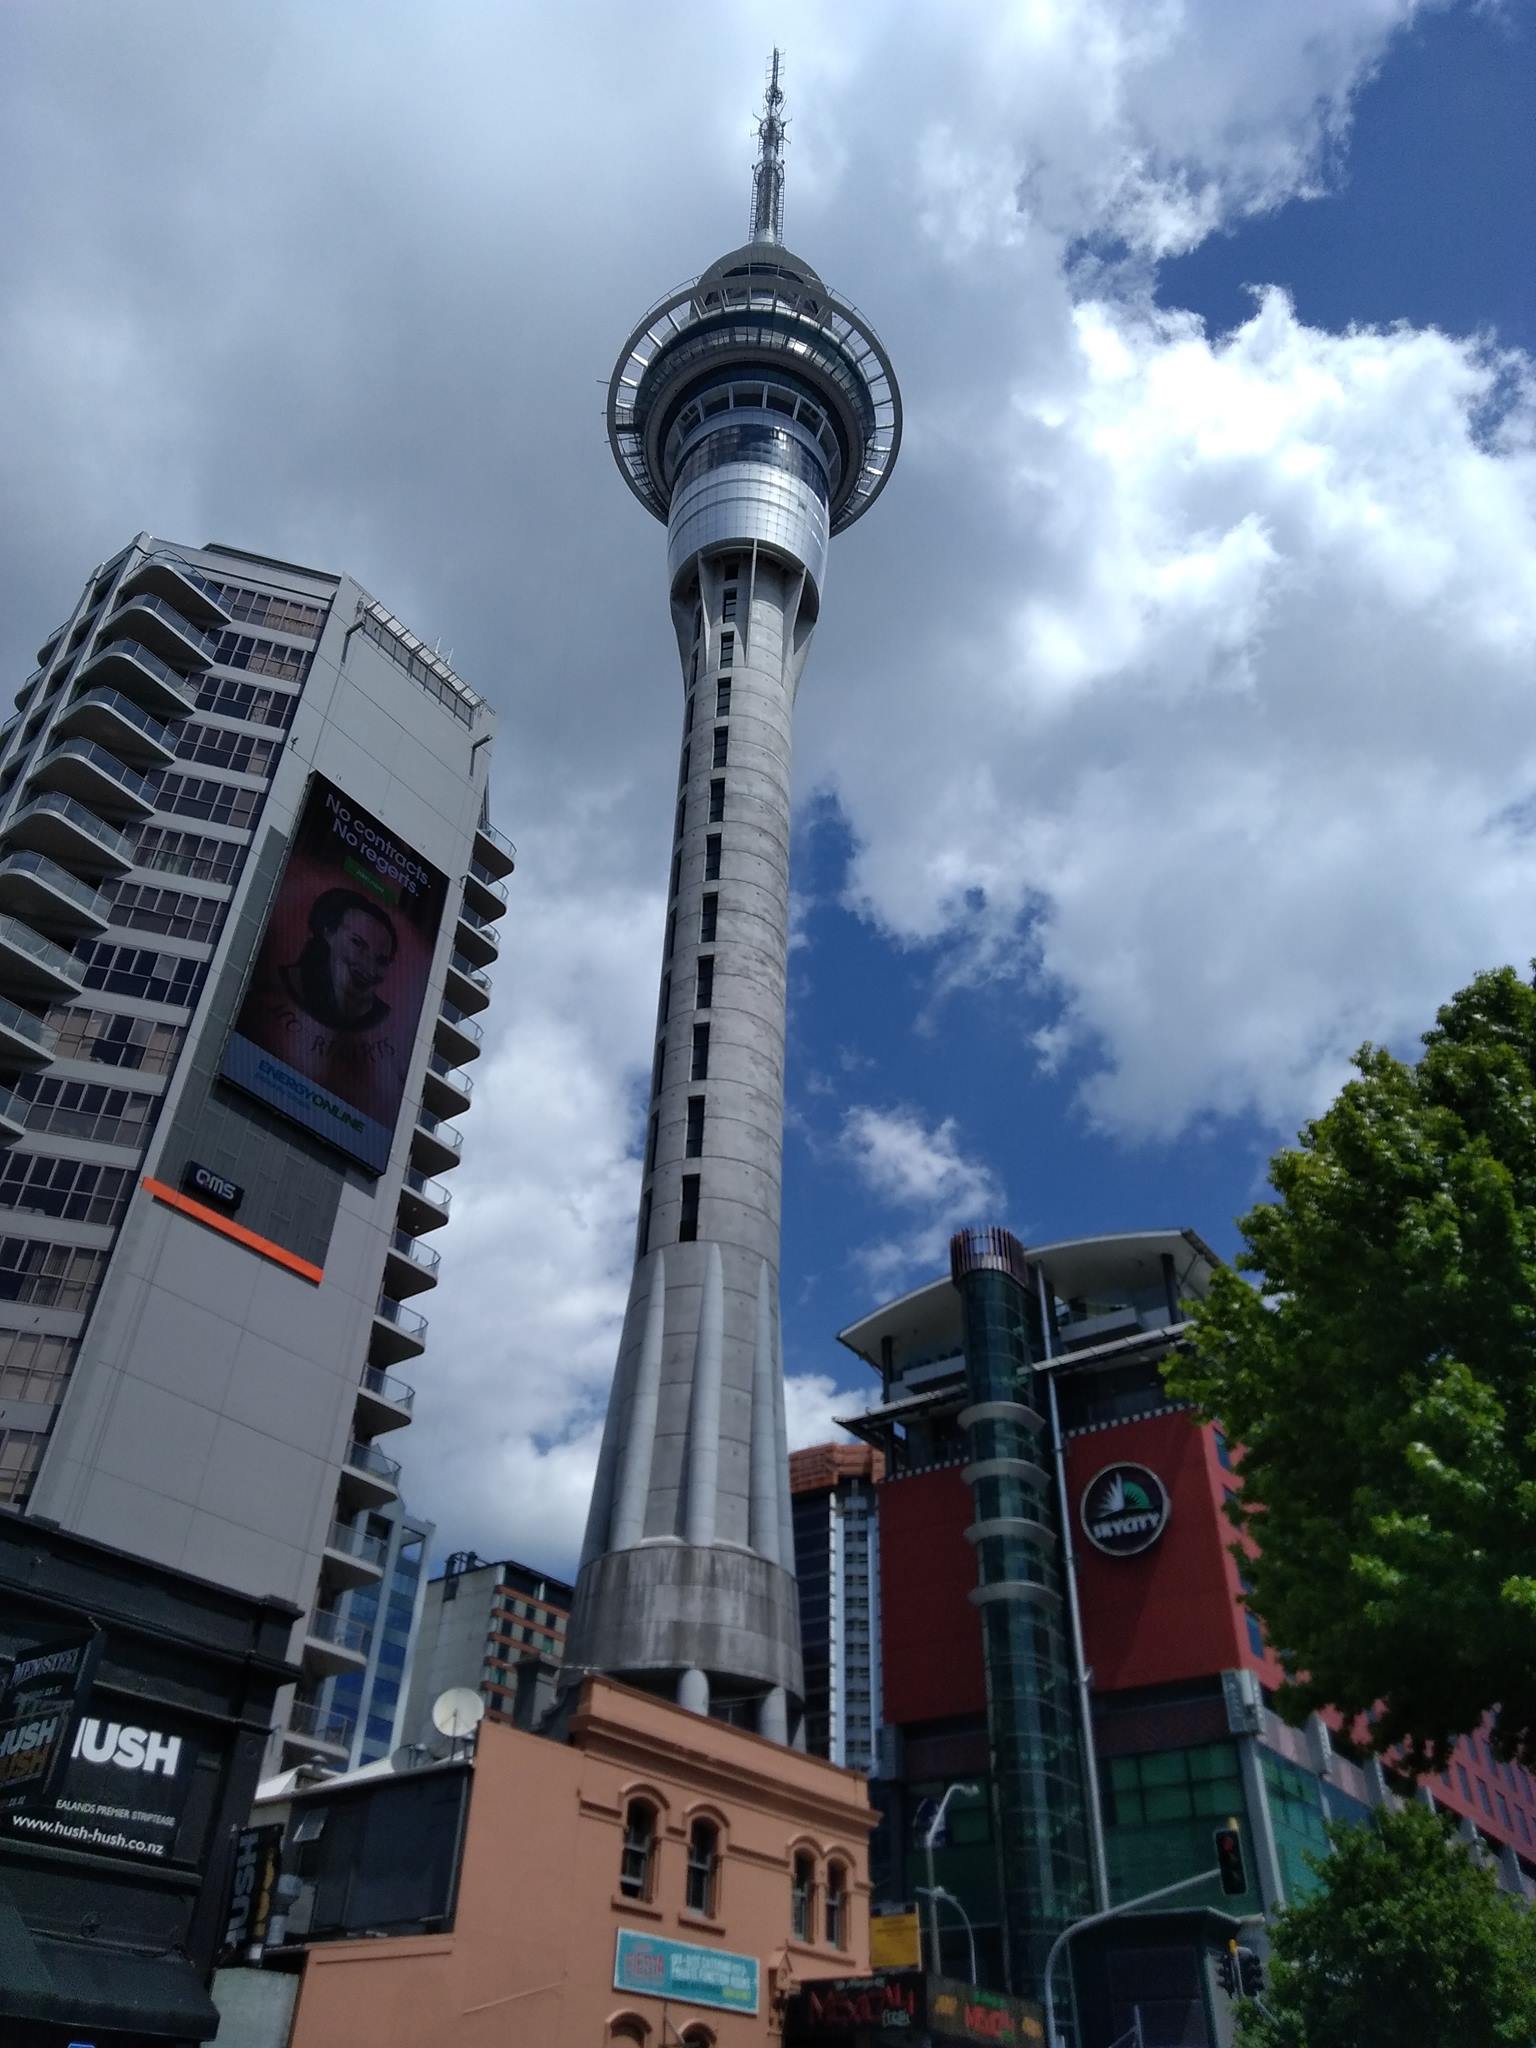 Sky Tower in Aukland on North Island of New Zealand